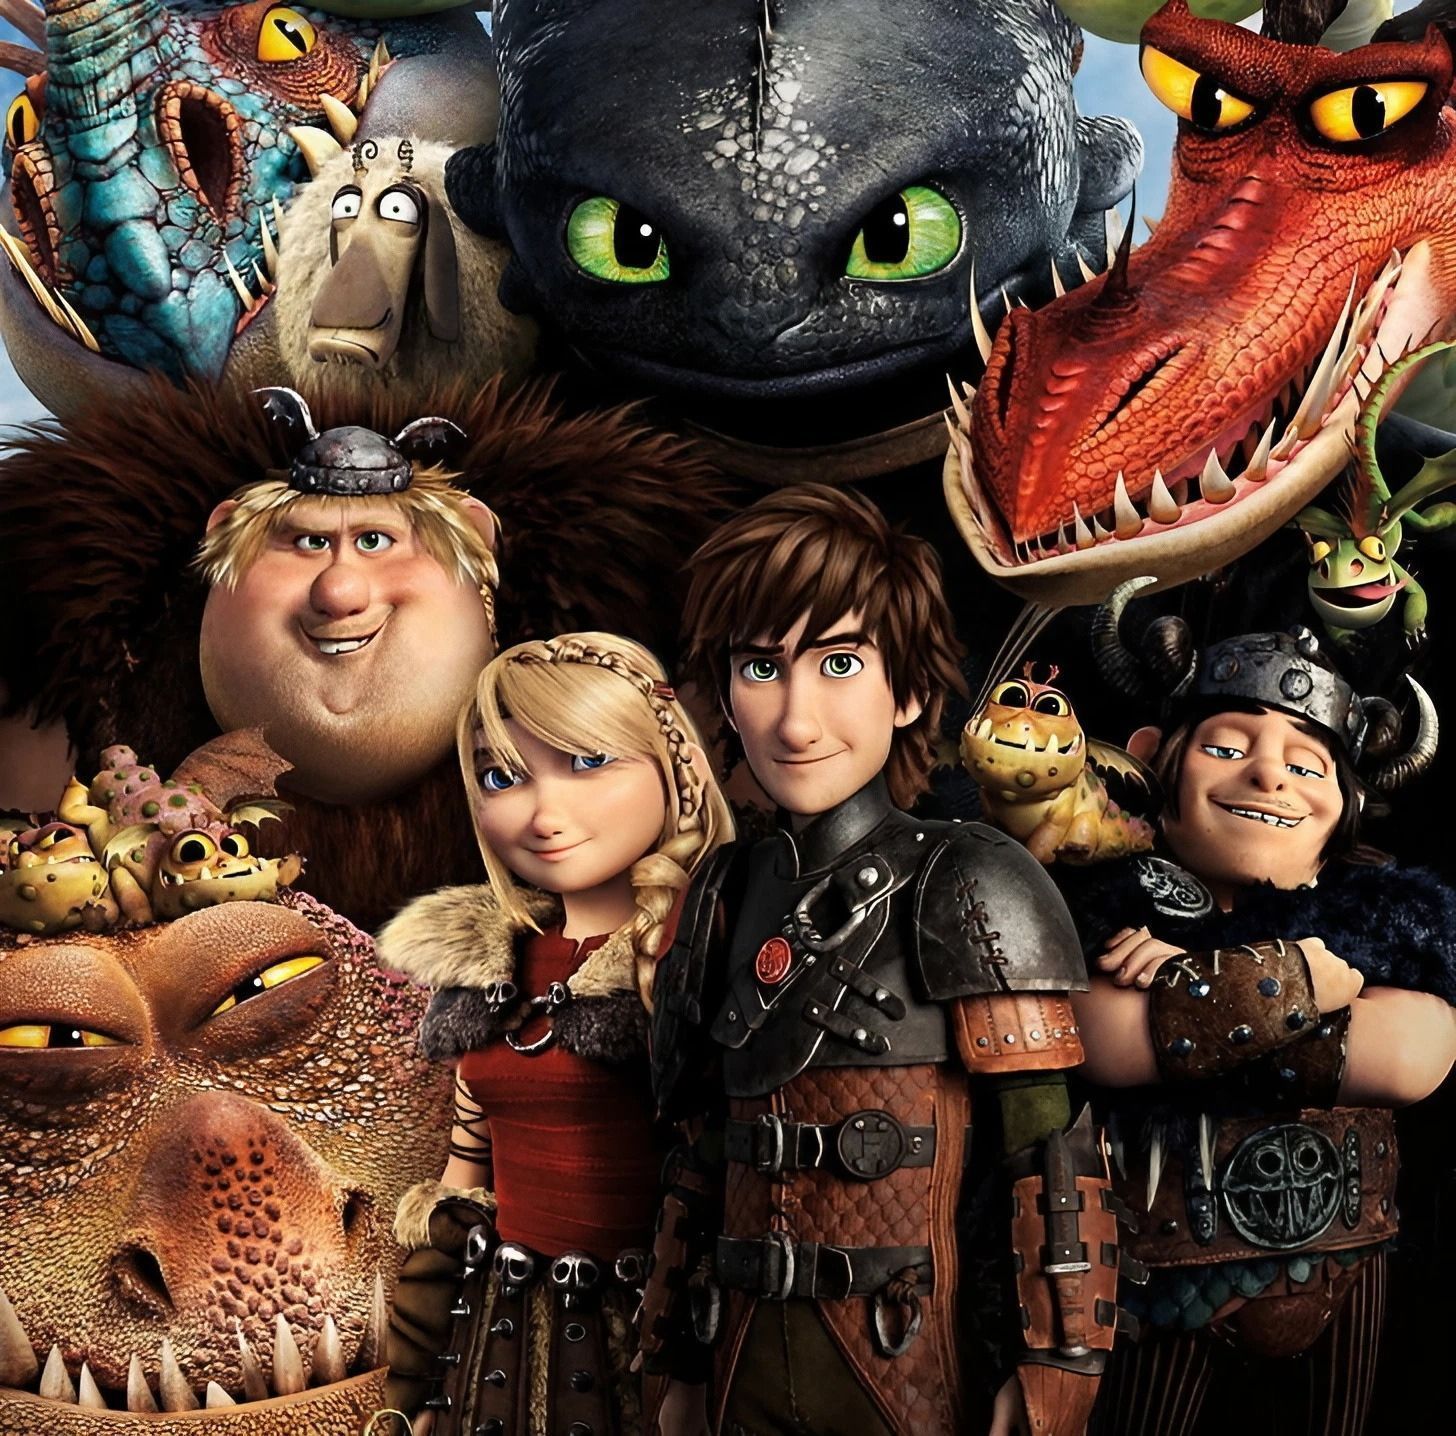 How to train your dragon Wallpaper Download